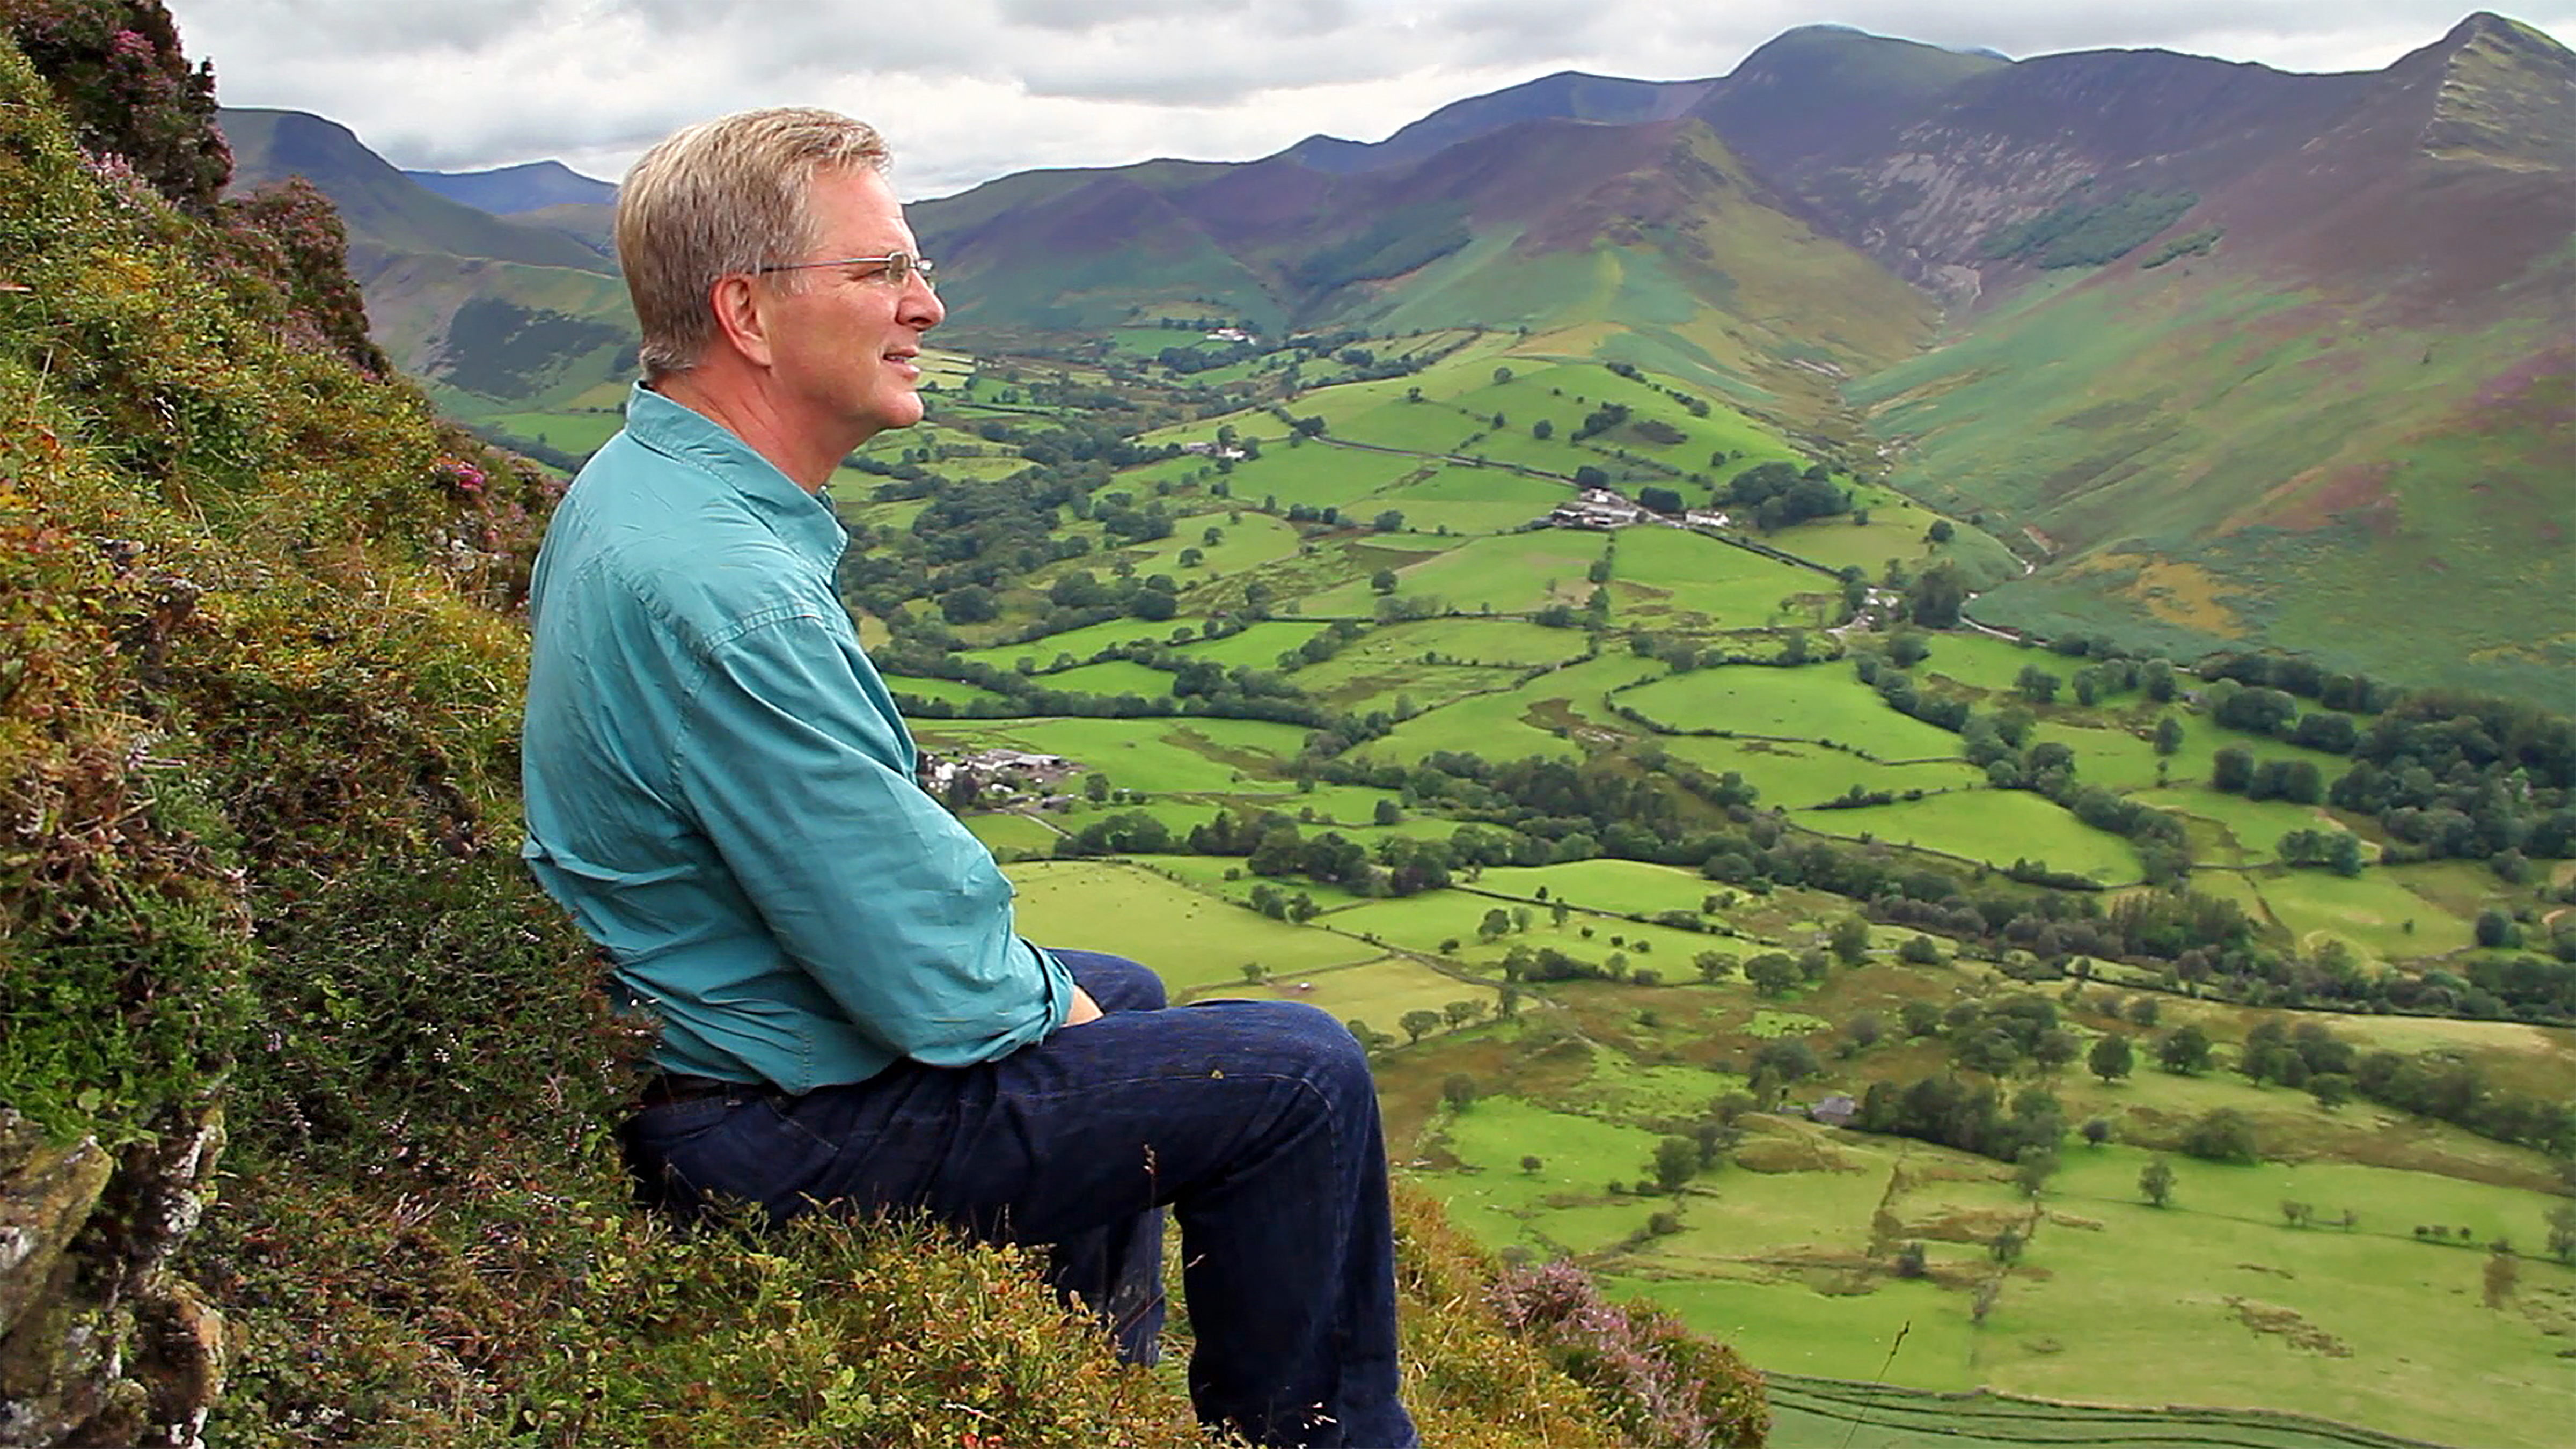 England's Lake District: Land of Great Hikes and Poets